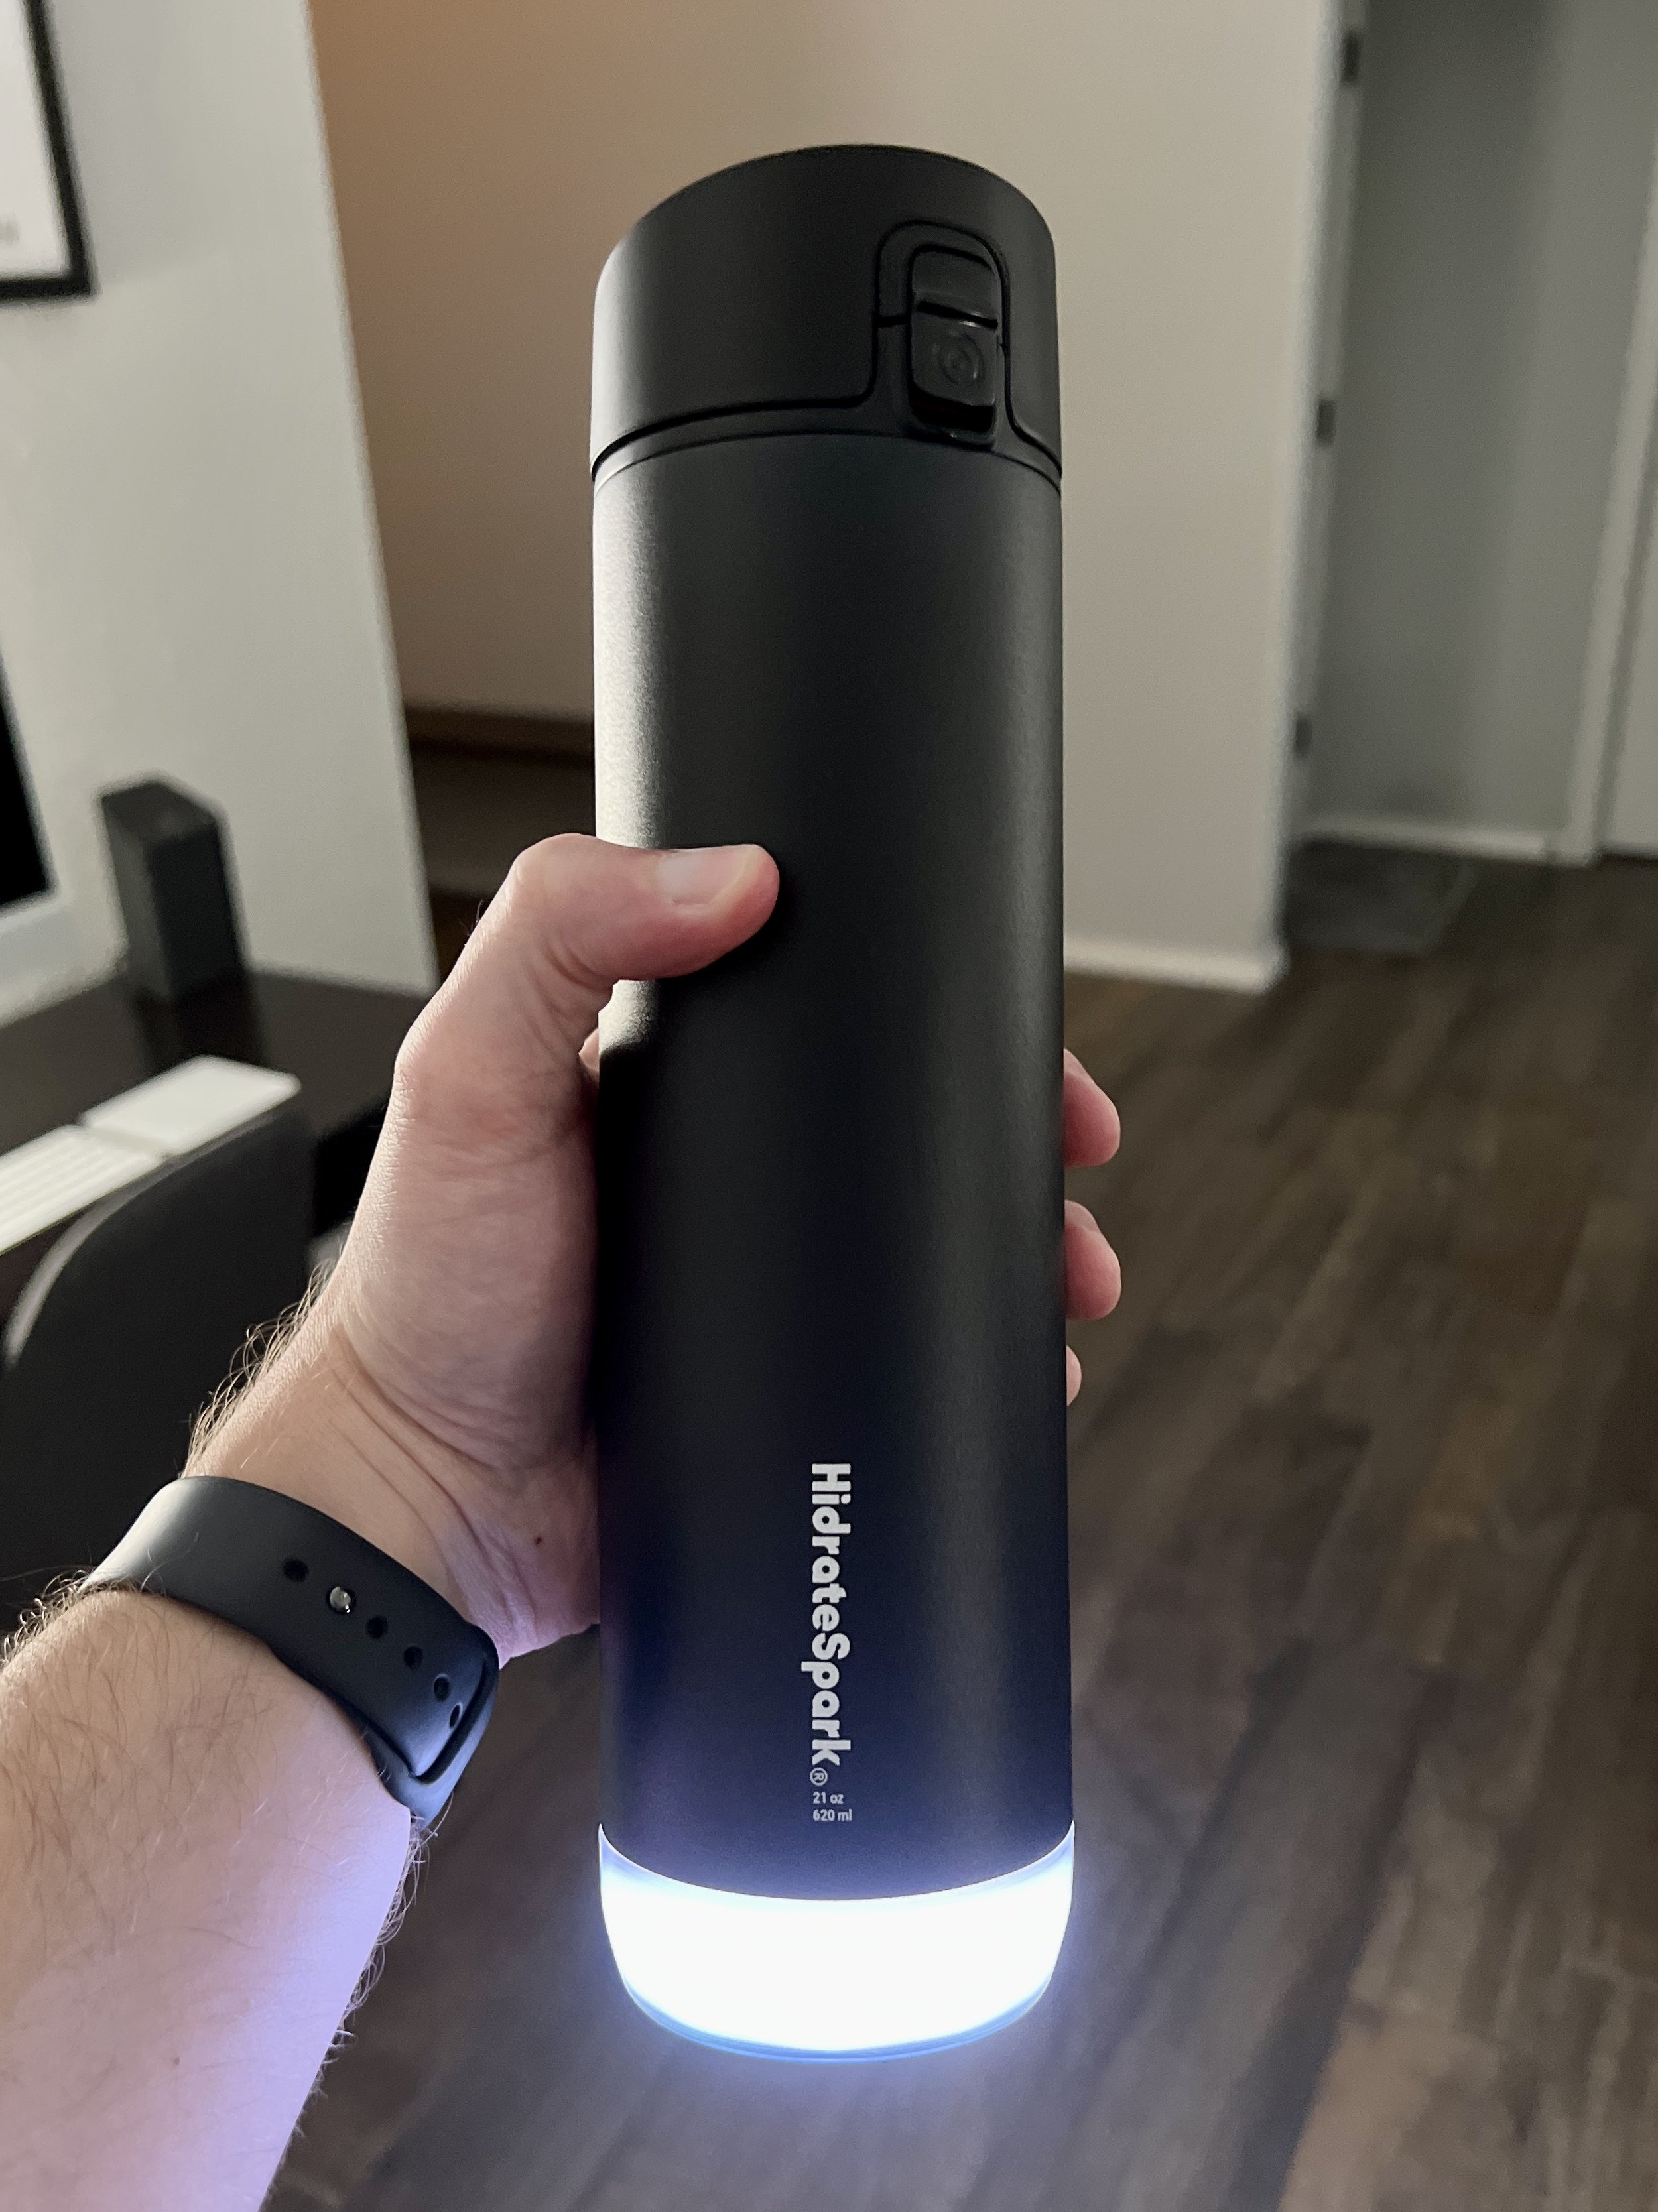 Apple Now Selling Two New HidrateSpark Smart Water Bottles With